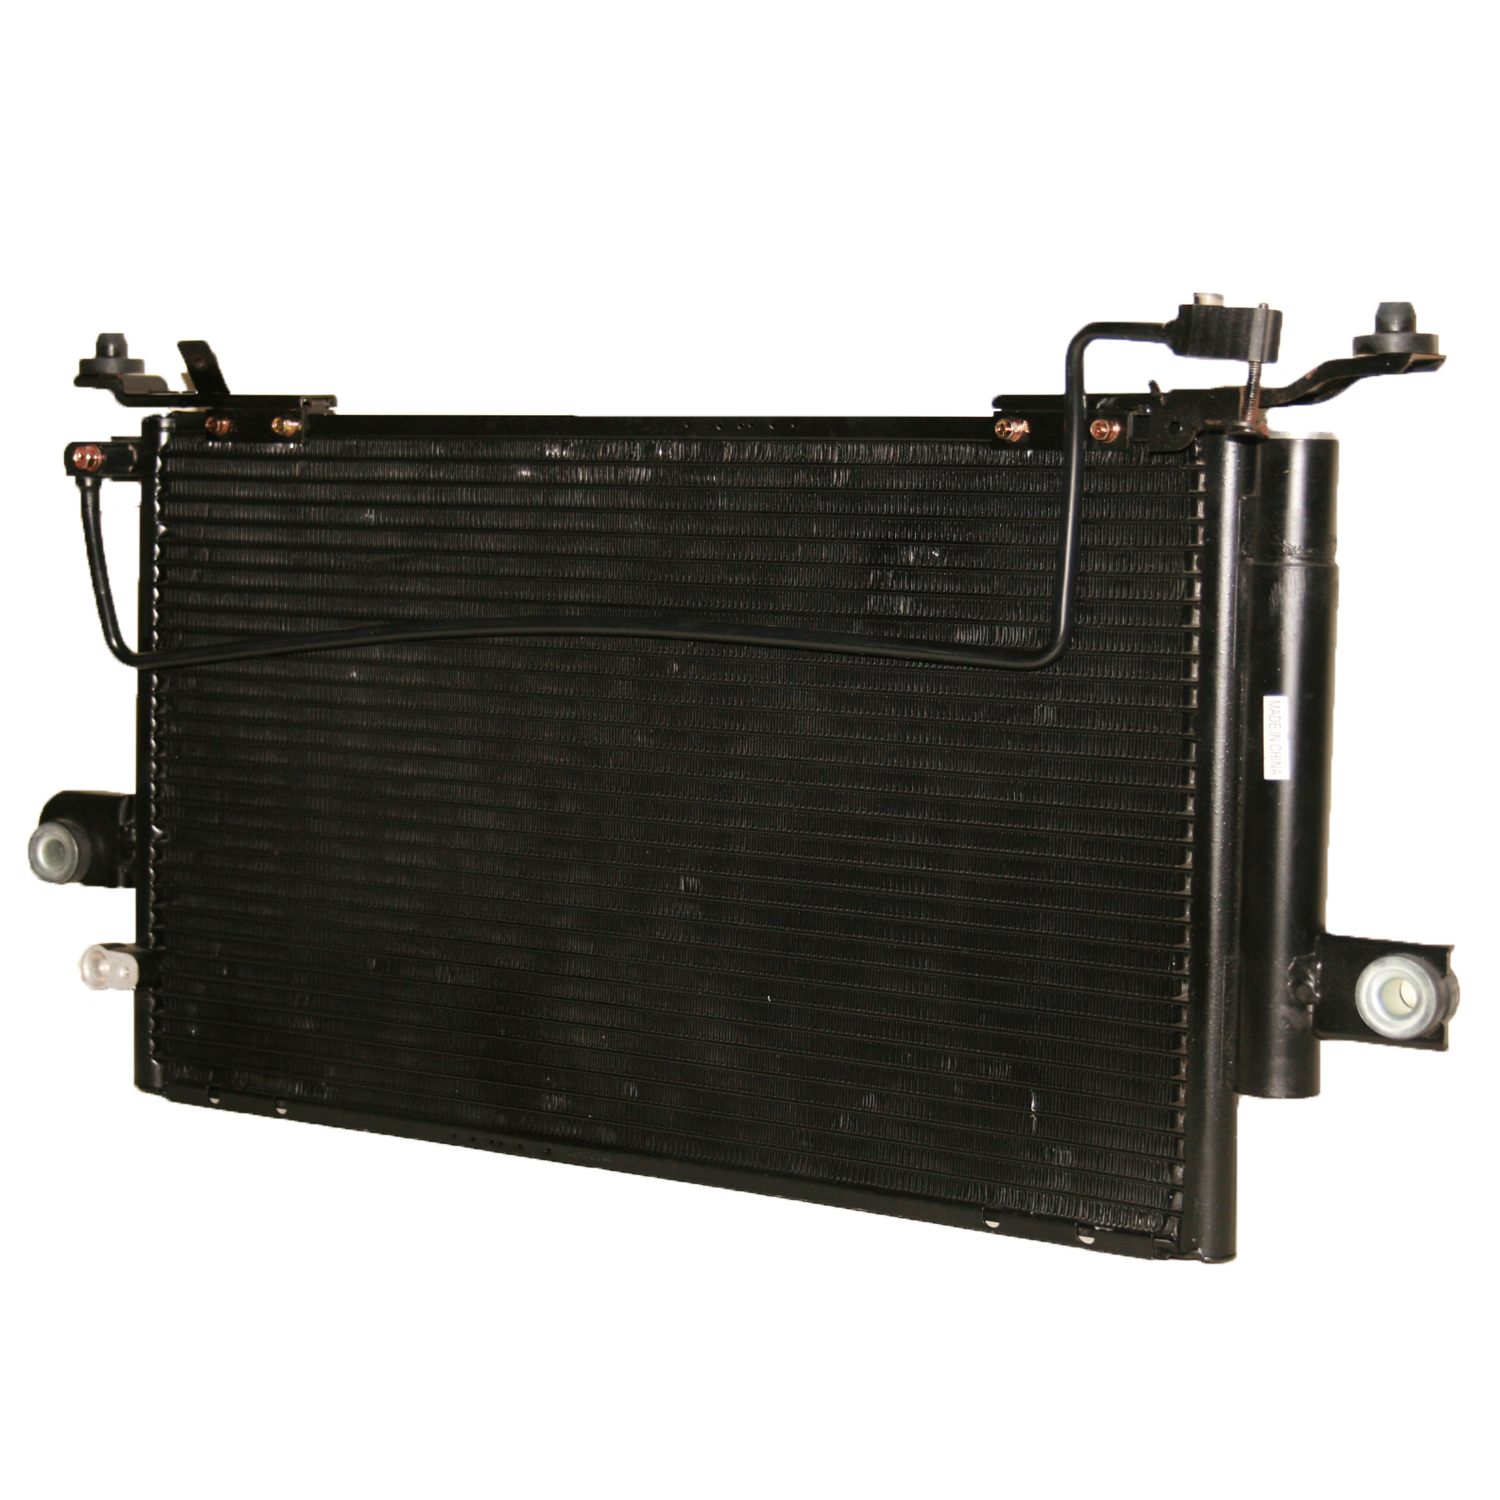 TCW Condenser 44-3110 New Product Image field_60b6a13a6e67c